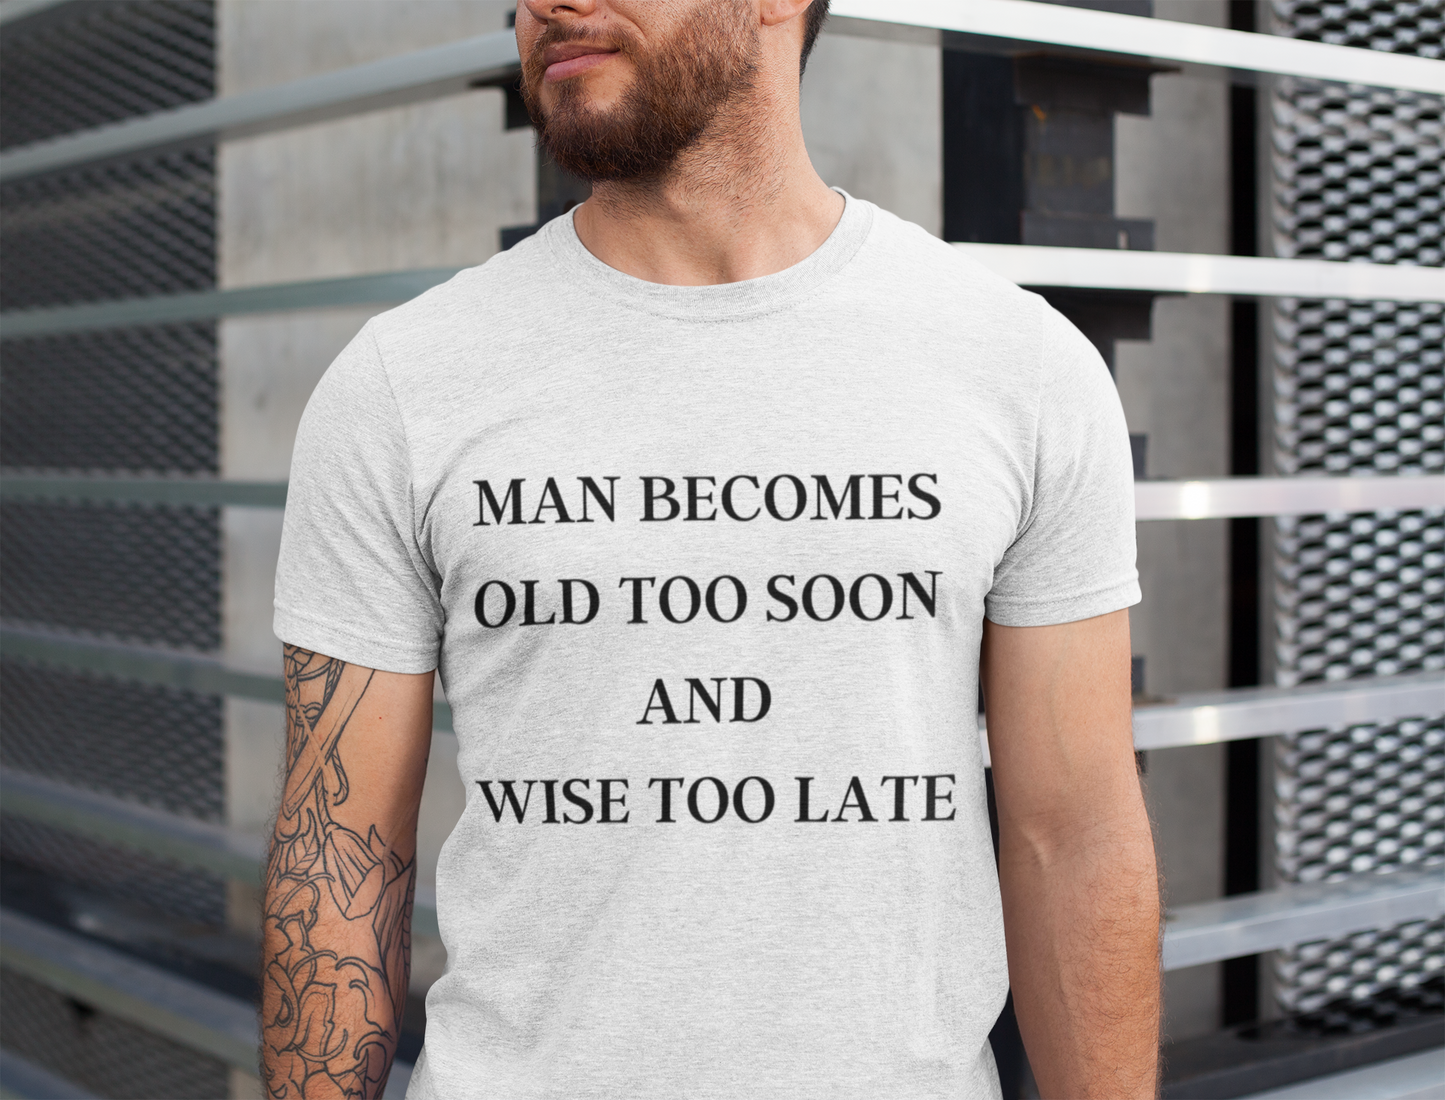 Jersey Short ,funny t-shirt, men's t-shirt, funny  birthday gift, man becomes old too soon and wise too late